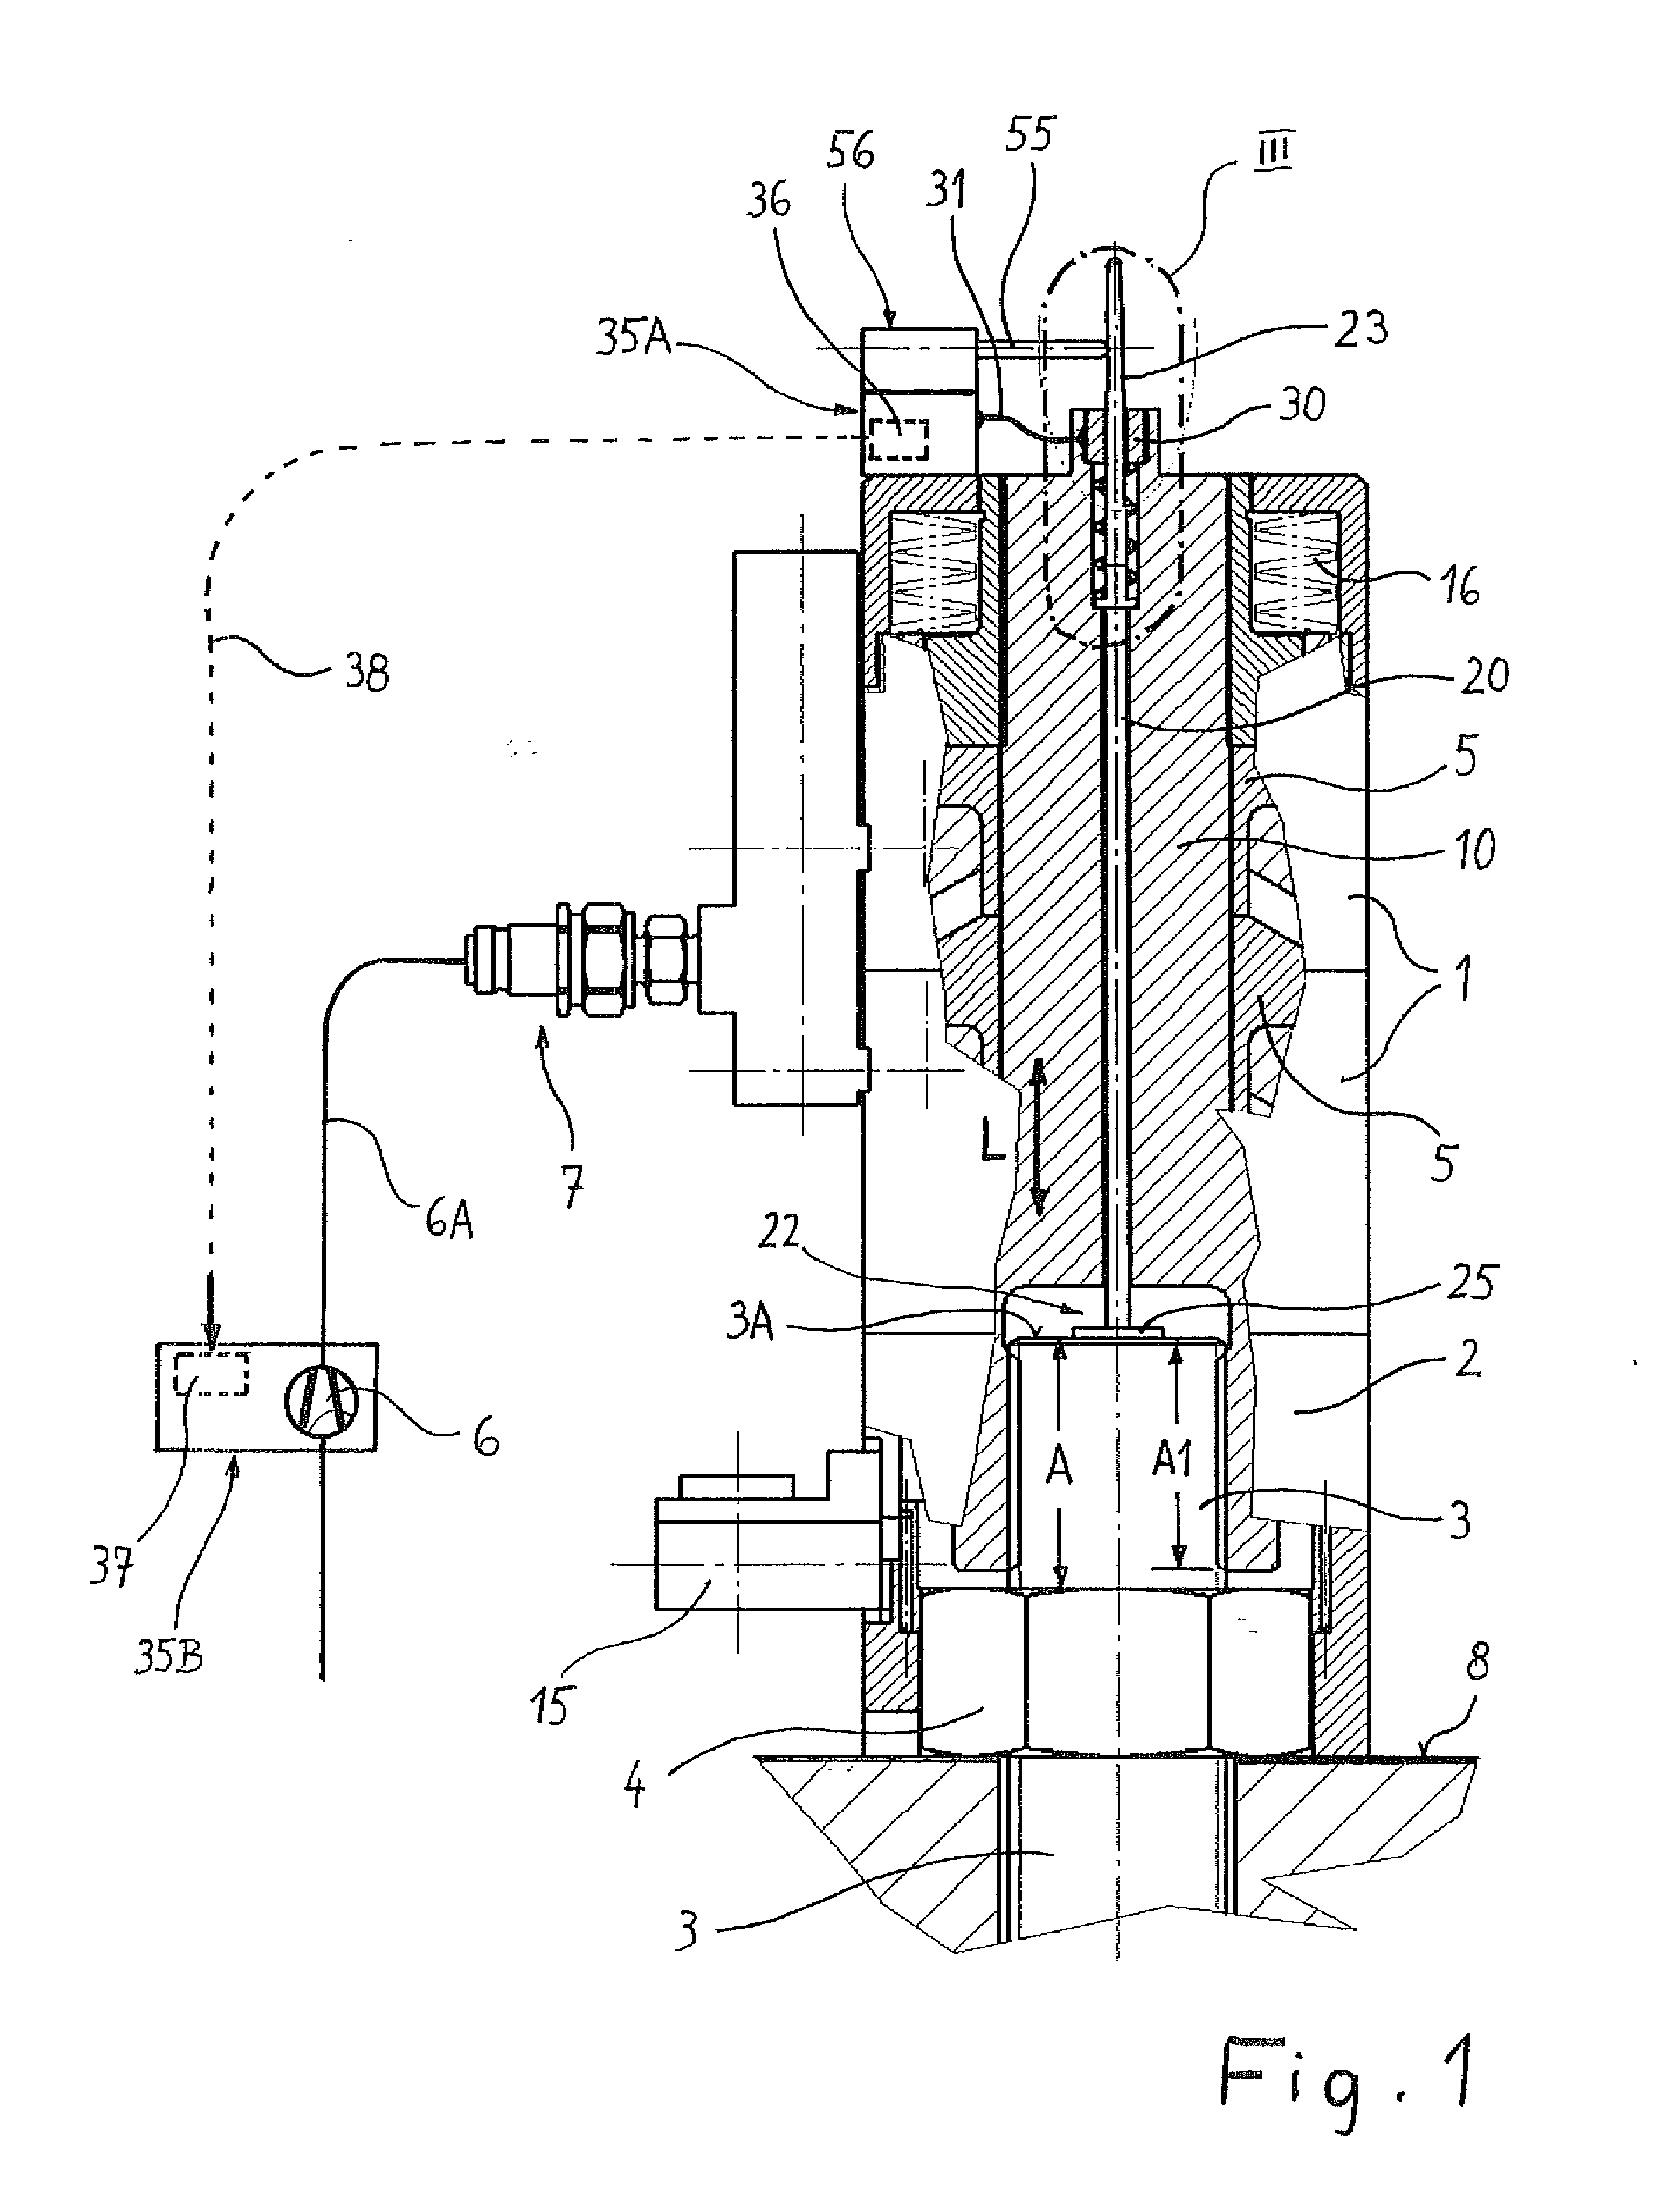 Tensioning device for extending a threaded bolt